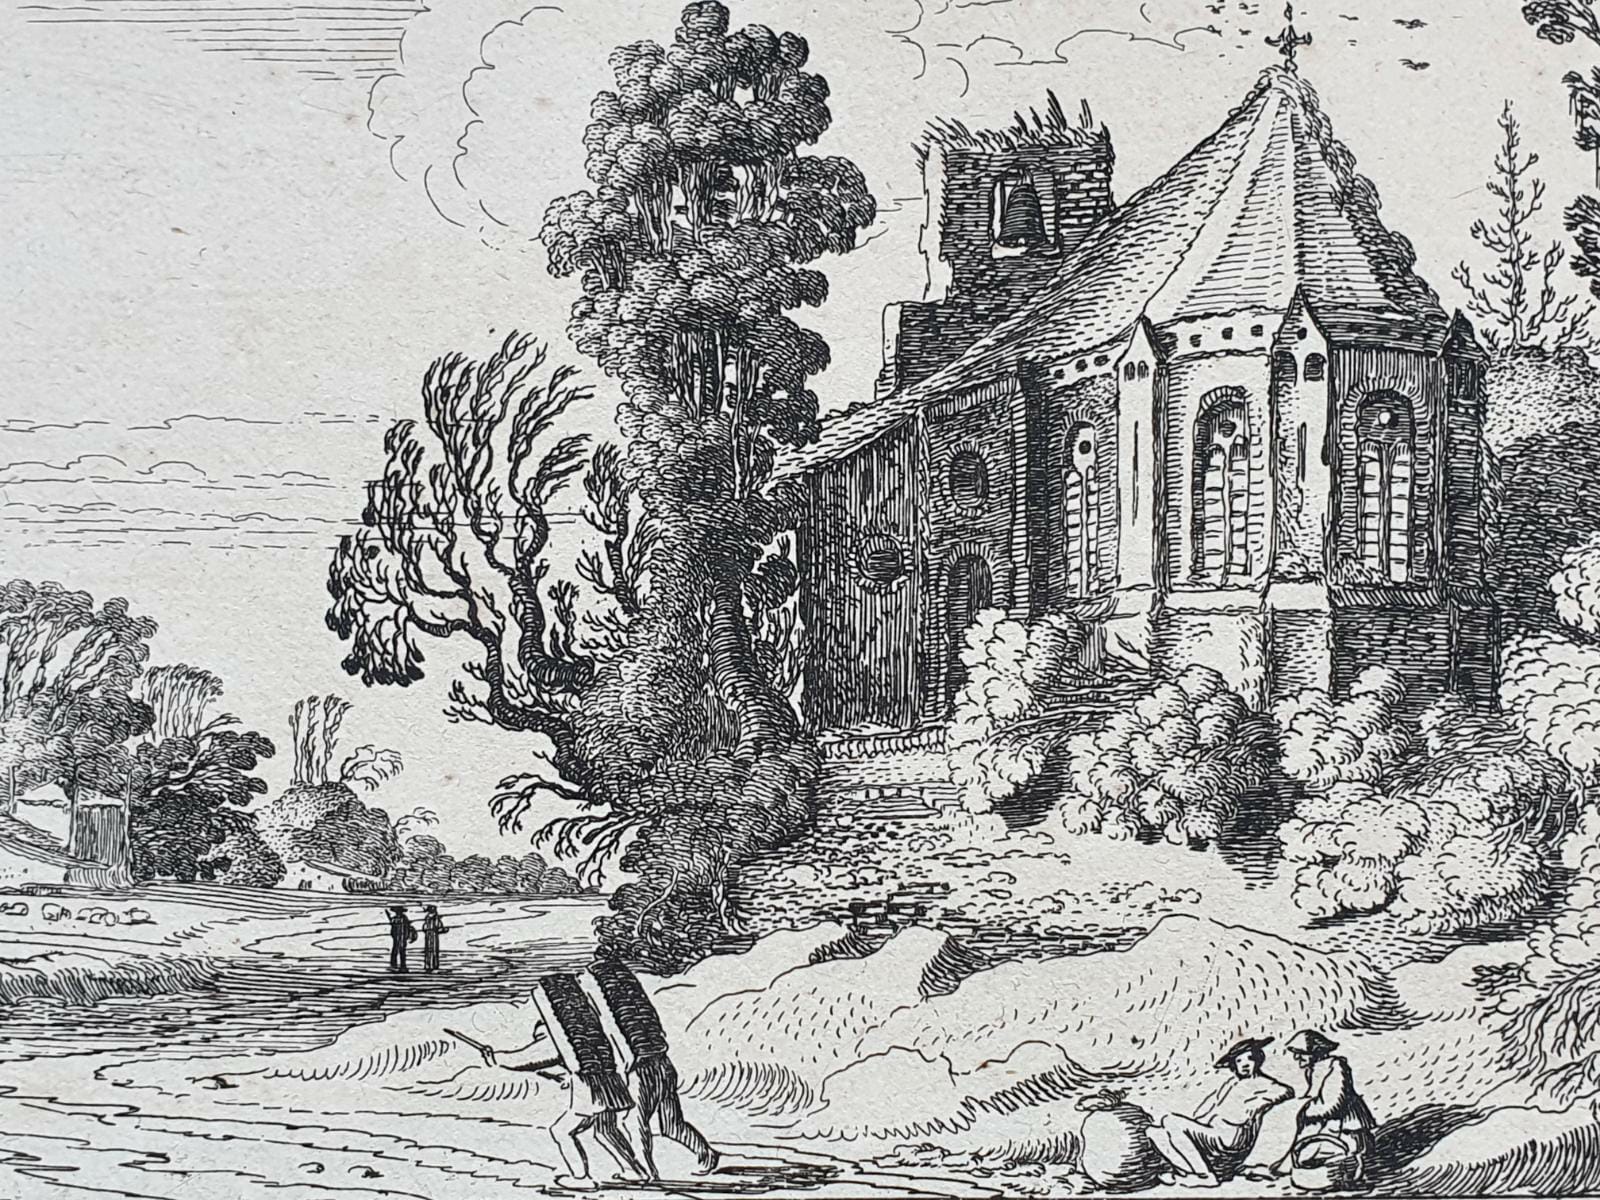 [Antique etching, ets, landscape print] J. v.d. Velde II, Figures on a country road near a ruined church, published before 1713.